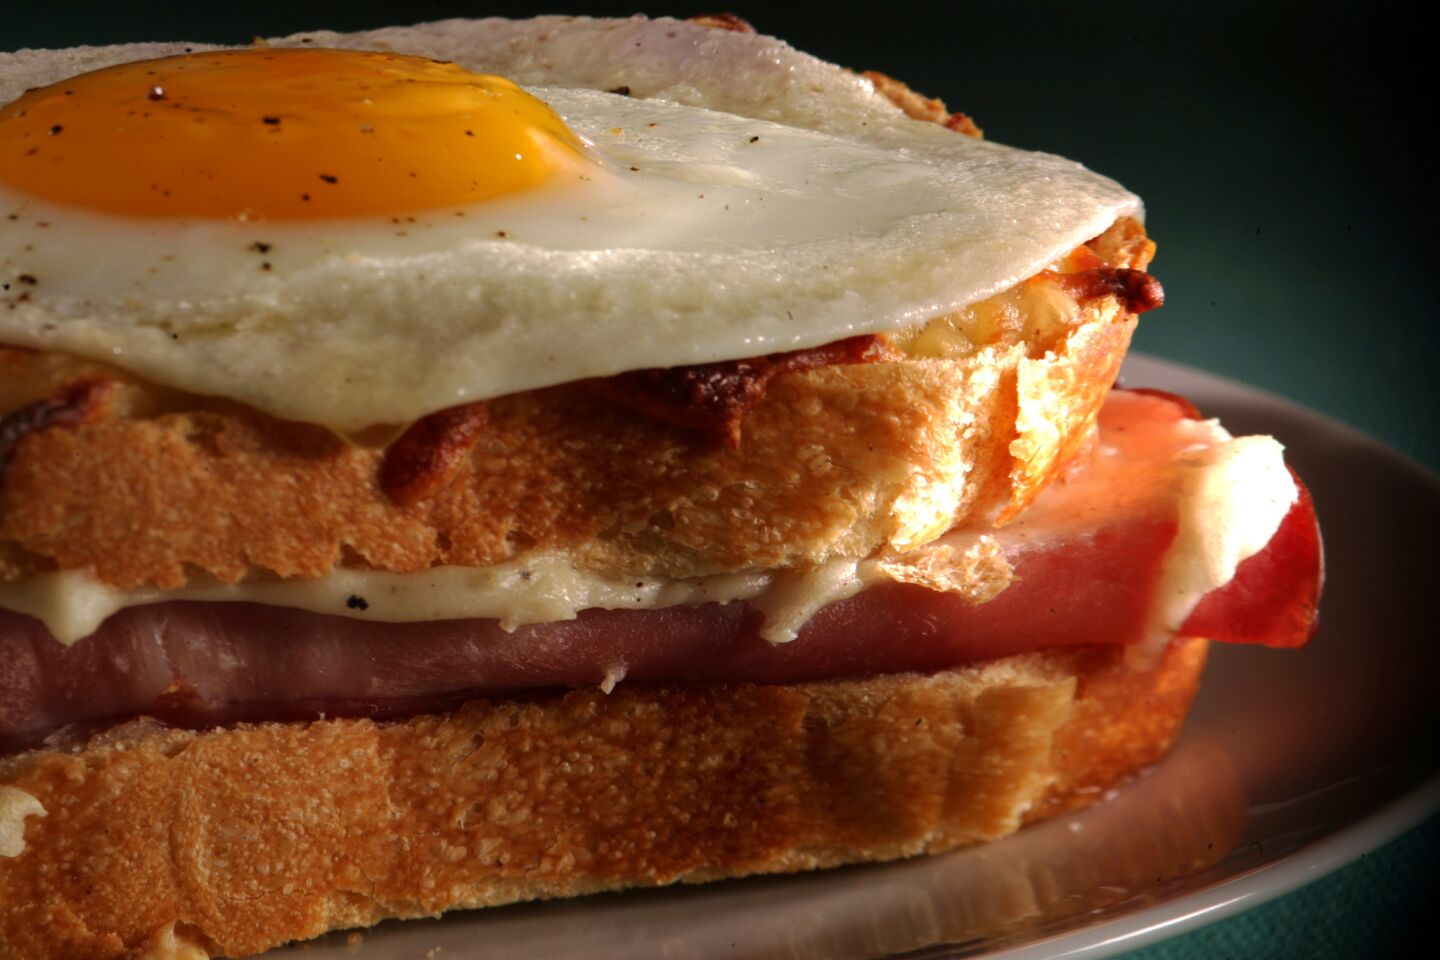 IRRESISTABLE: The Croque Madame served at La Dijonaise in Culver City. Click here for the recipe.